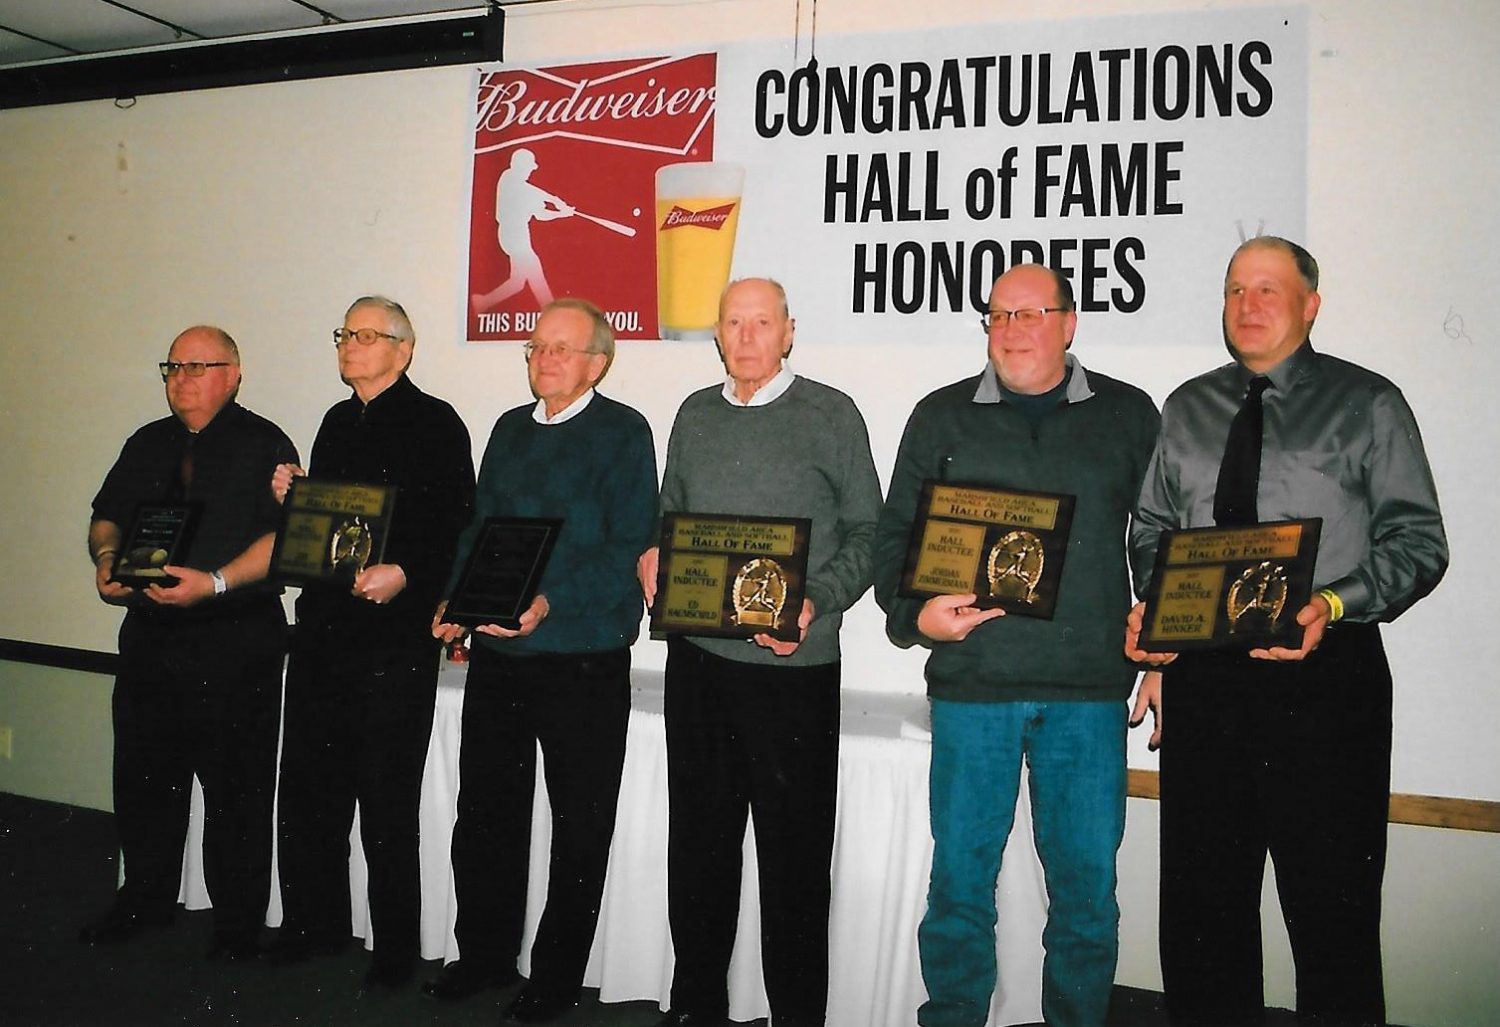 From left: Marlyn Laabs; Jim Parmalee; Marvin Kohlbeck; Ed Haumschild; Jeff Zimmermann, receiving the plaque on behalf of his son Jordan; and David A. Hinker were honored by the Marshfield Area Baseball and Softball Hall of Fame on Jan. 28.